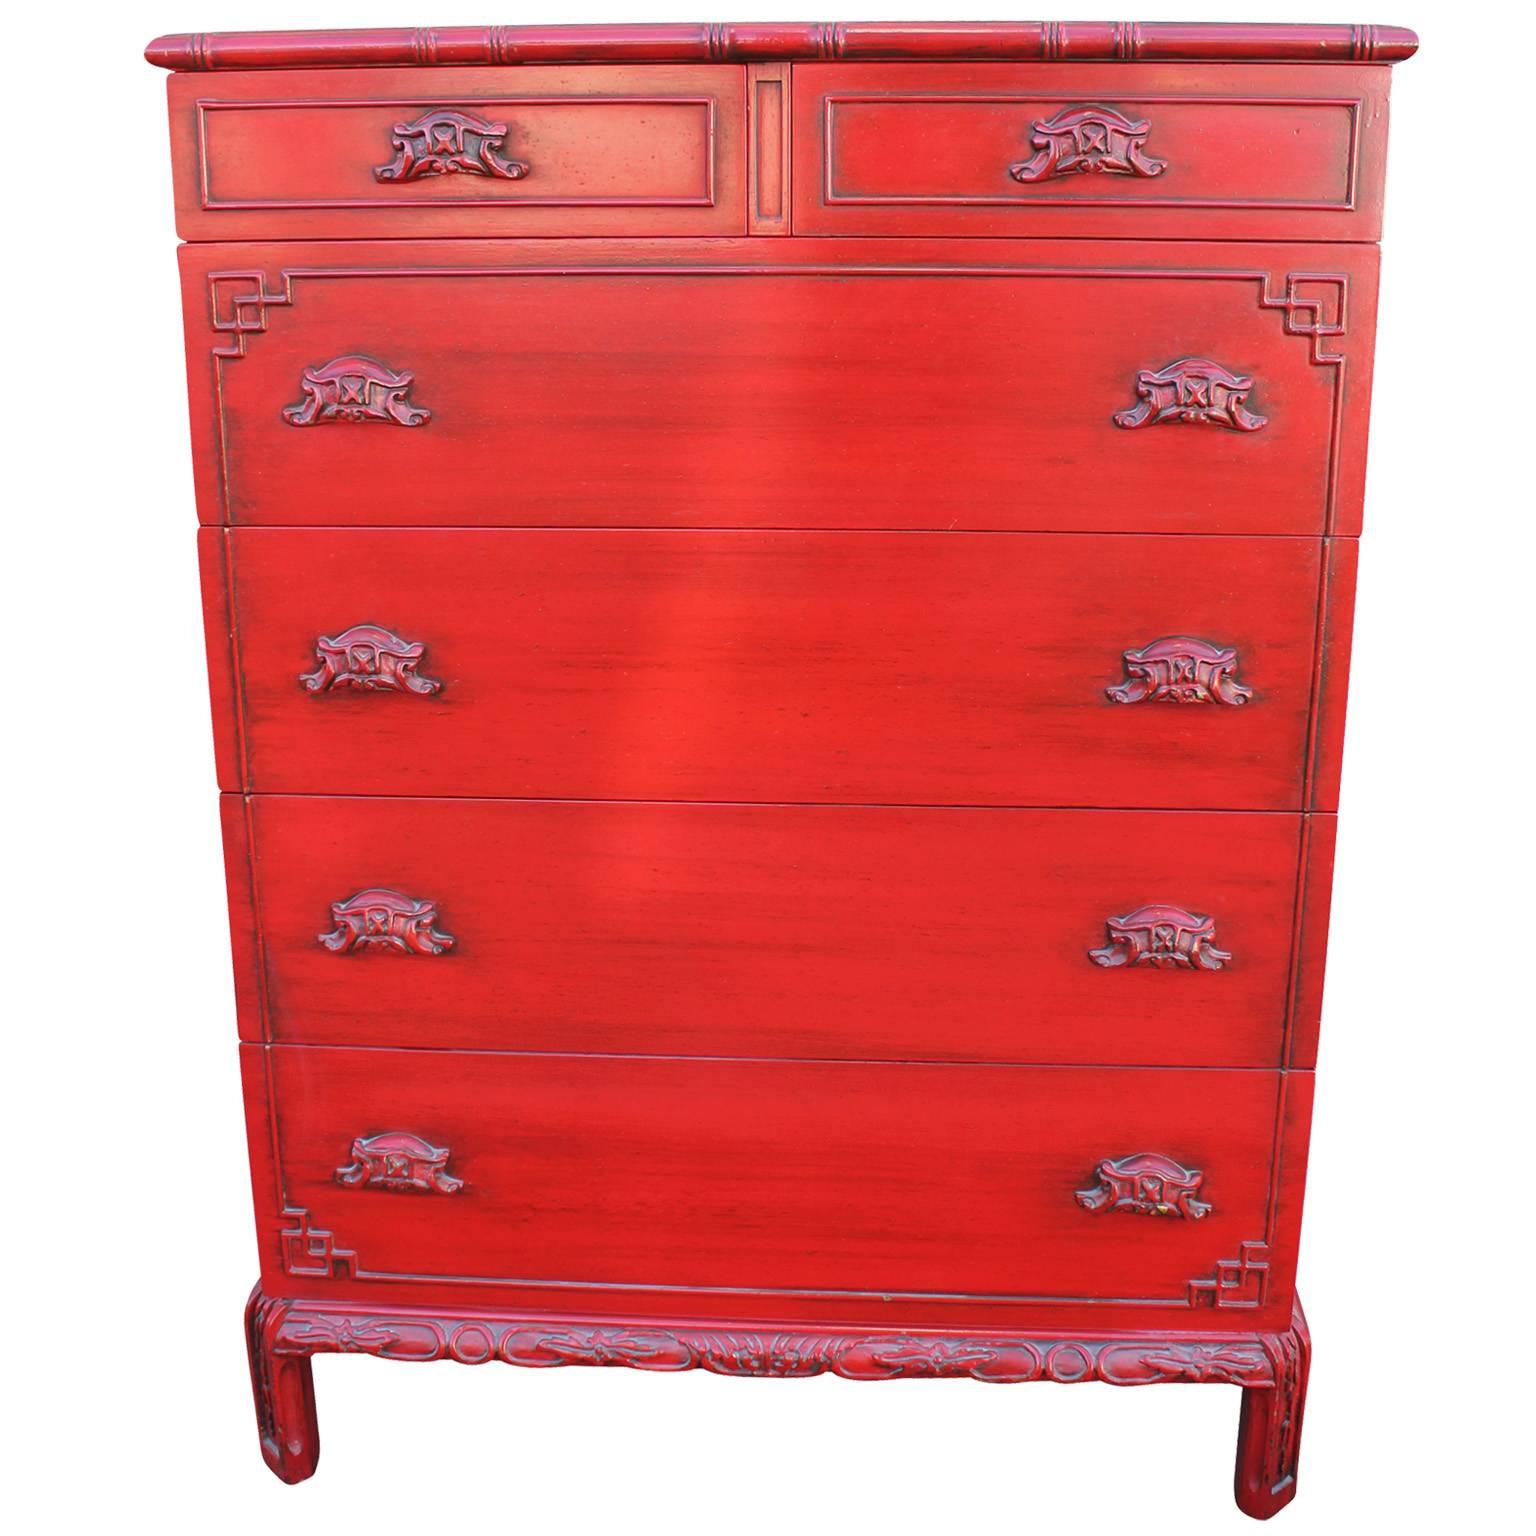 Stunning Chinese inspired dresser. Dresser is finished in an orange-red lacquer with a faux finish. Two small drawers and four large drawers provide excellent storage. The first large drawer is slotted for easy organization. Lovely piece sure to add